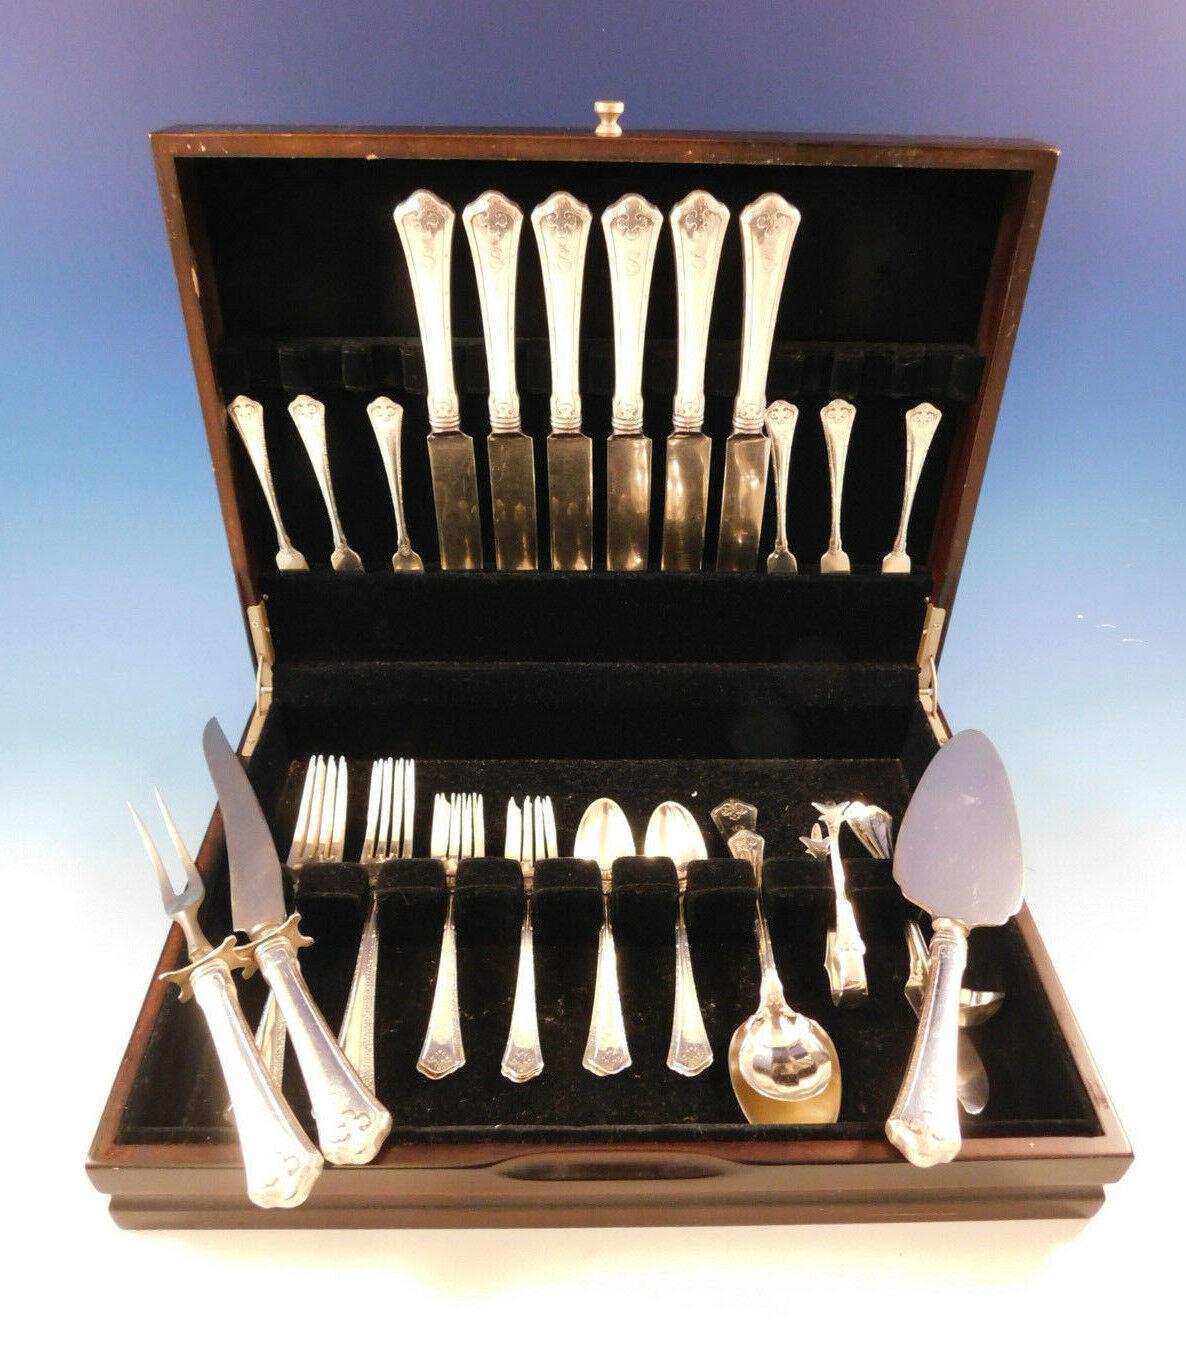 Carmel by Wallace sterling silver Dinner size Flatware set - 38 pieces. Great starter set! This Arts & Crafts pattern was introduced in the year 1912 and features a raised hammered border with stylized bolts. This set includes:

6 Dinner Size